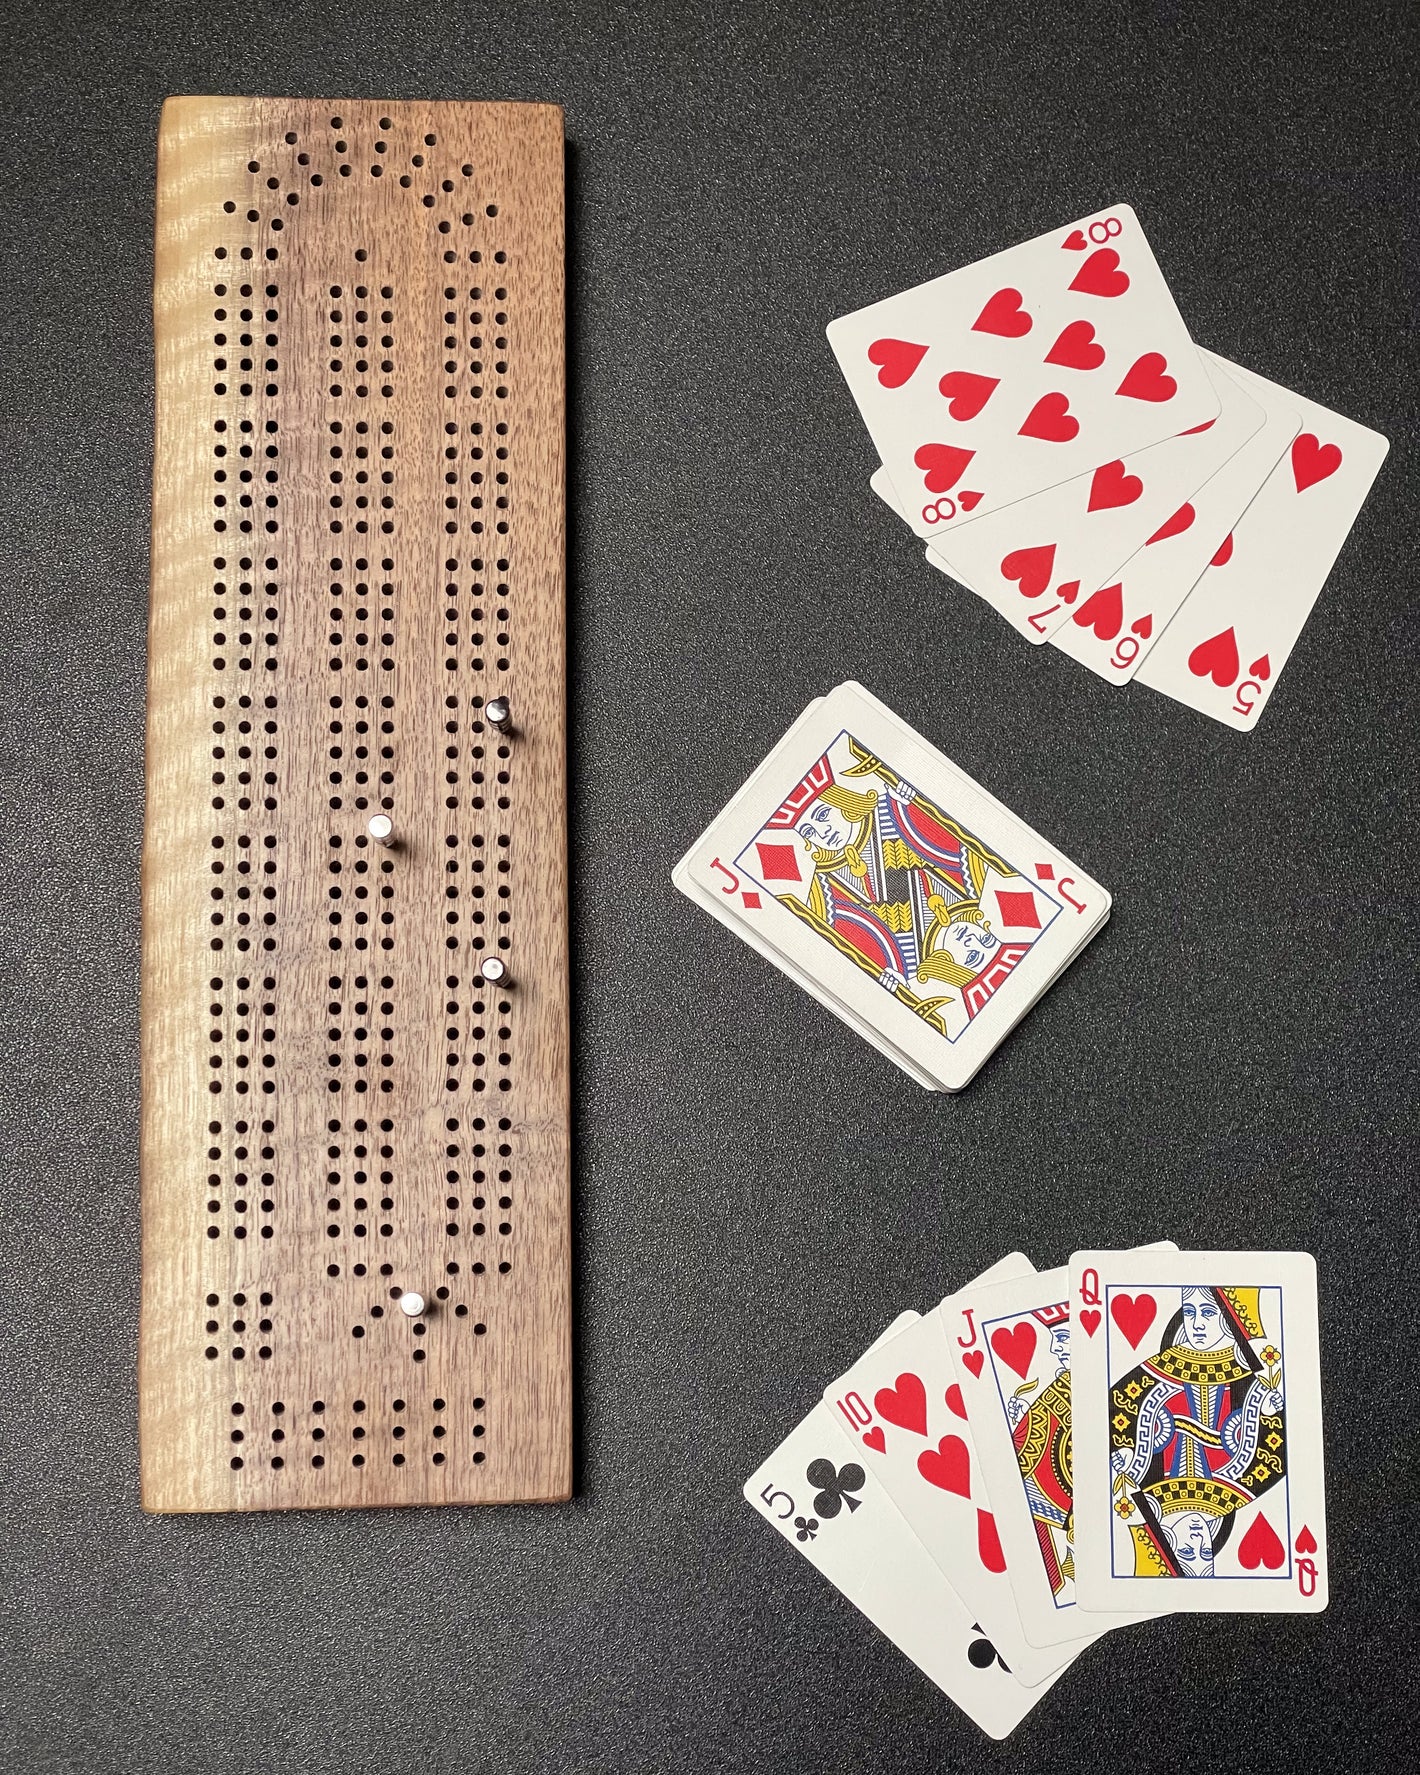 A table with a dark walnut wooden cribbage board and a deck of cards.